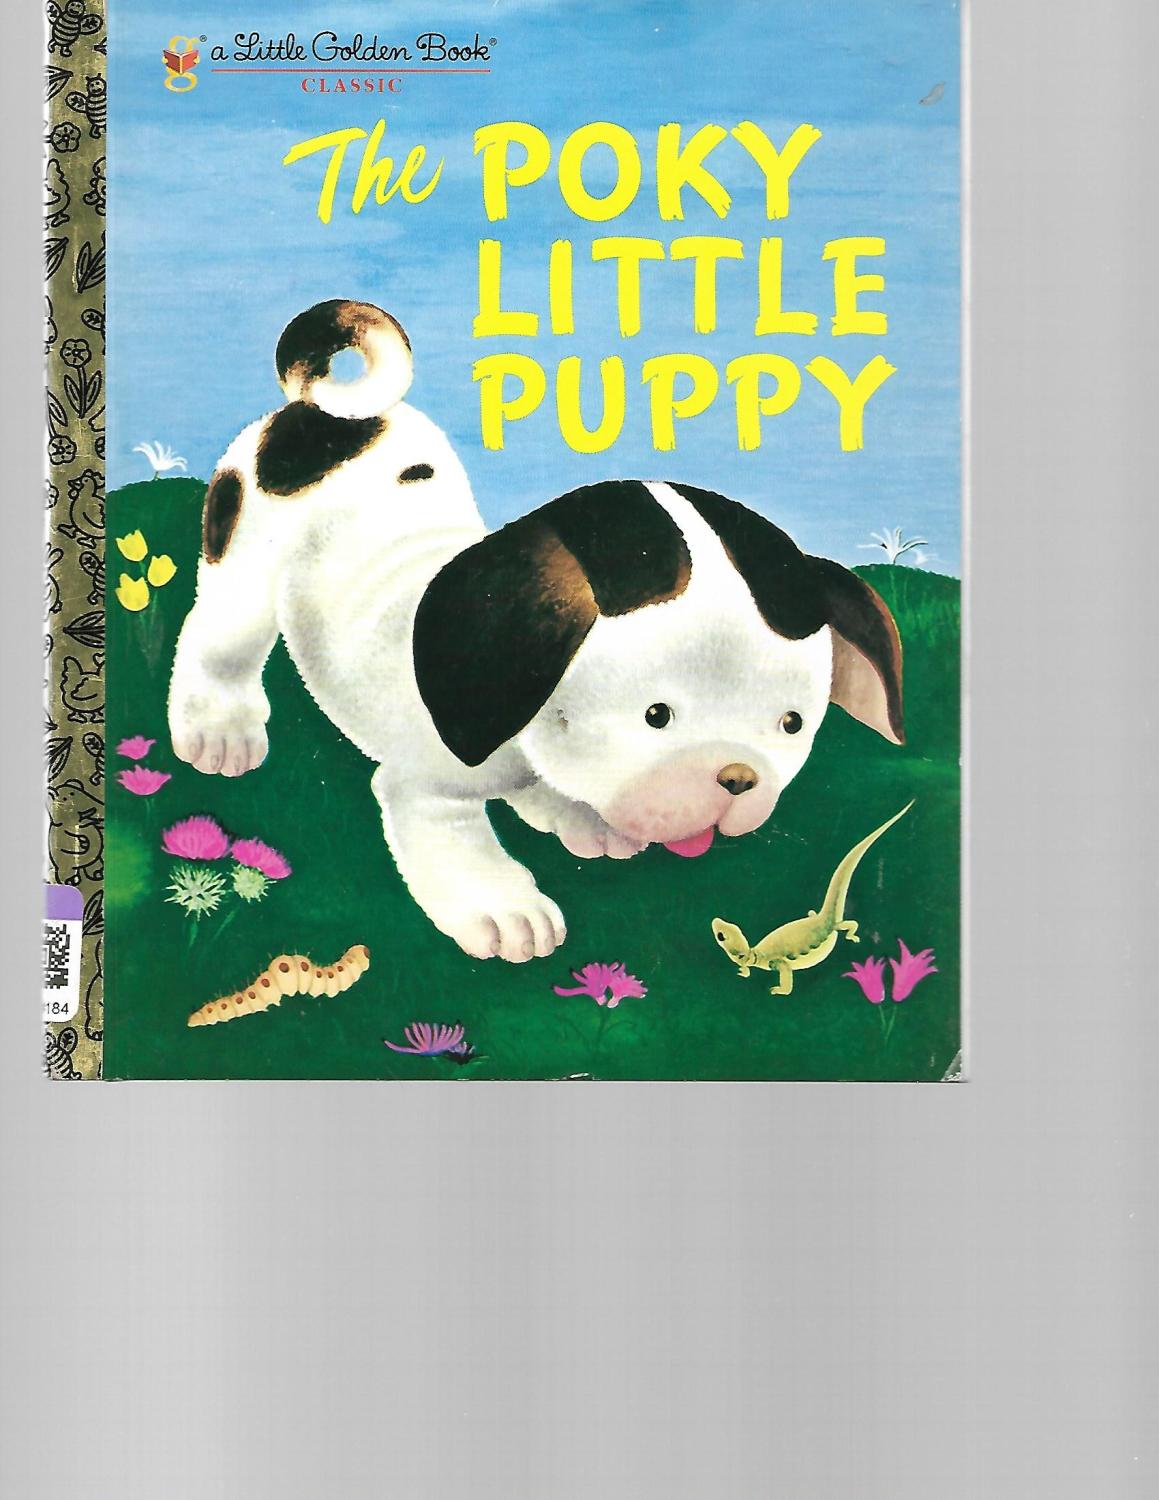 The Poky Little Puppy (A Little Golden Book Classic) by Janette Sebring  Lowrey: Very Good Hardcover (2001) 1st Edition TuosistBook